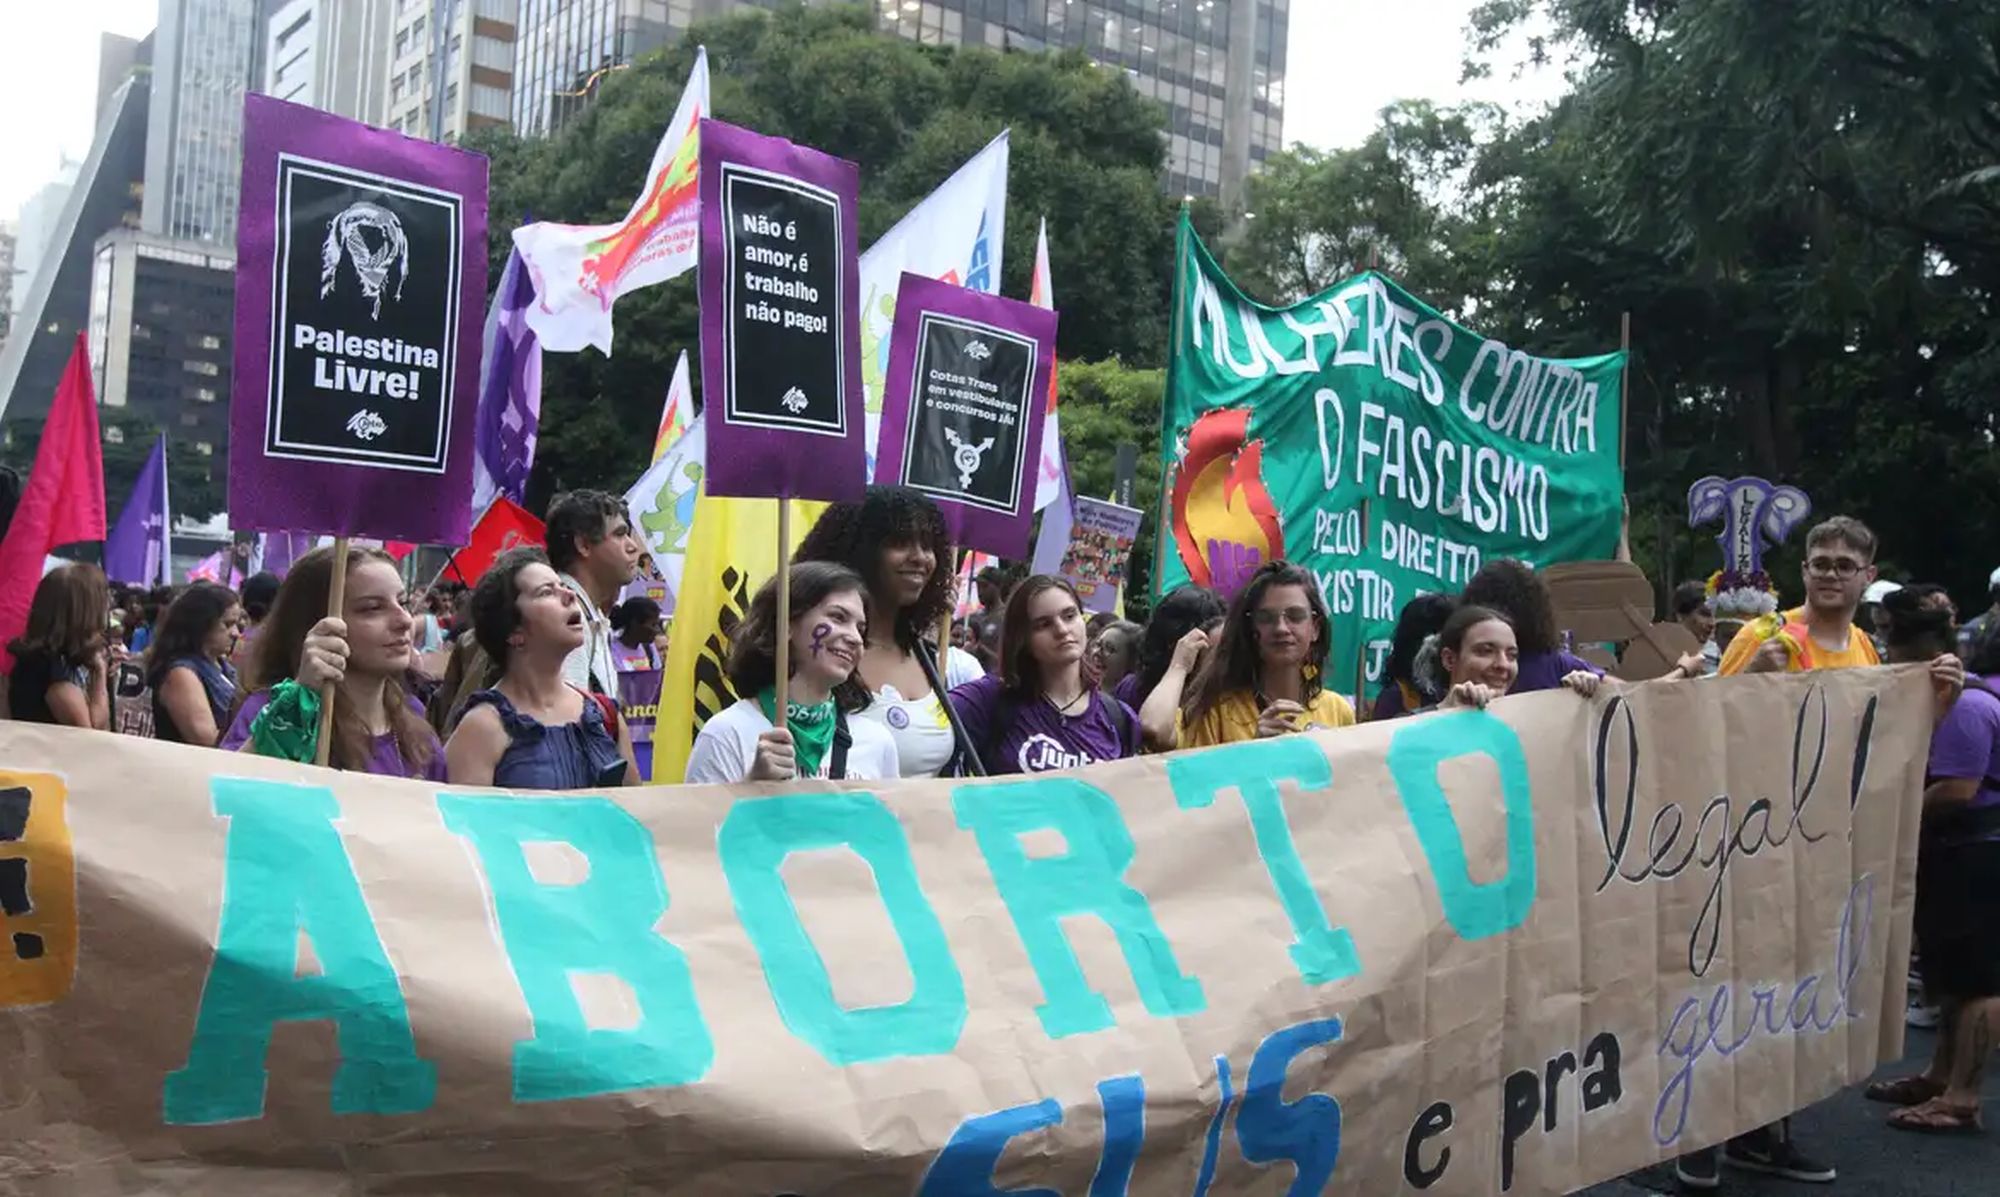 People protest in Sao Paulo against an anti-abortion bill